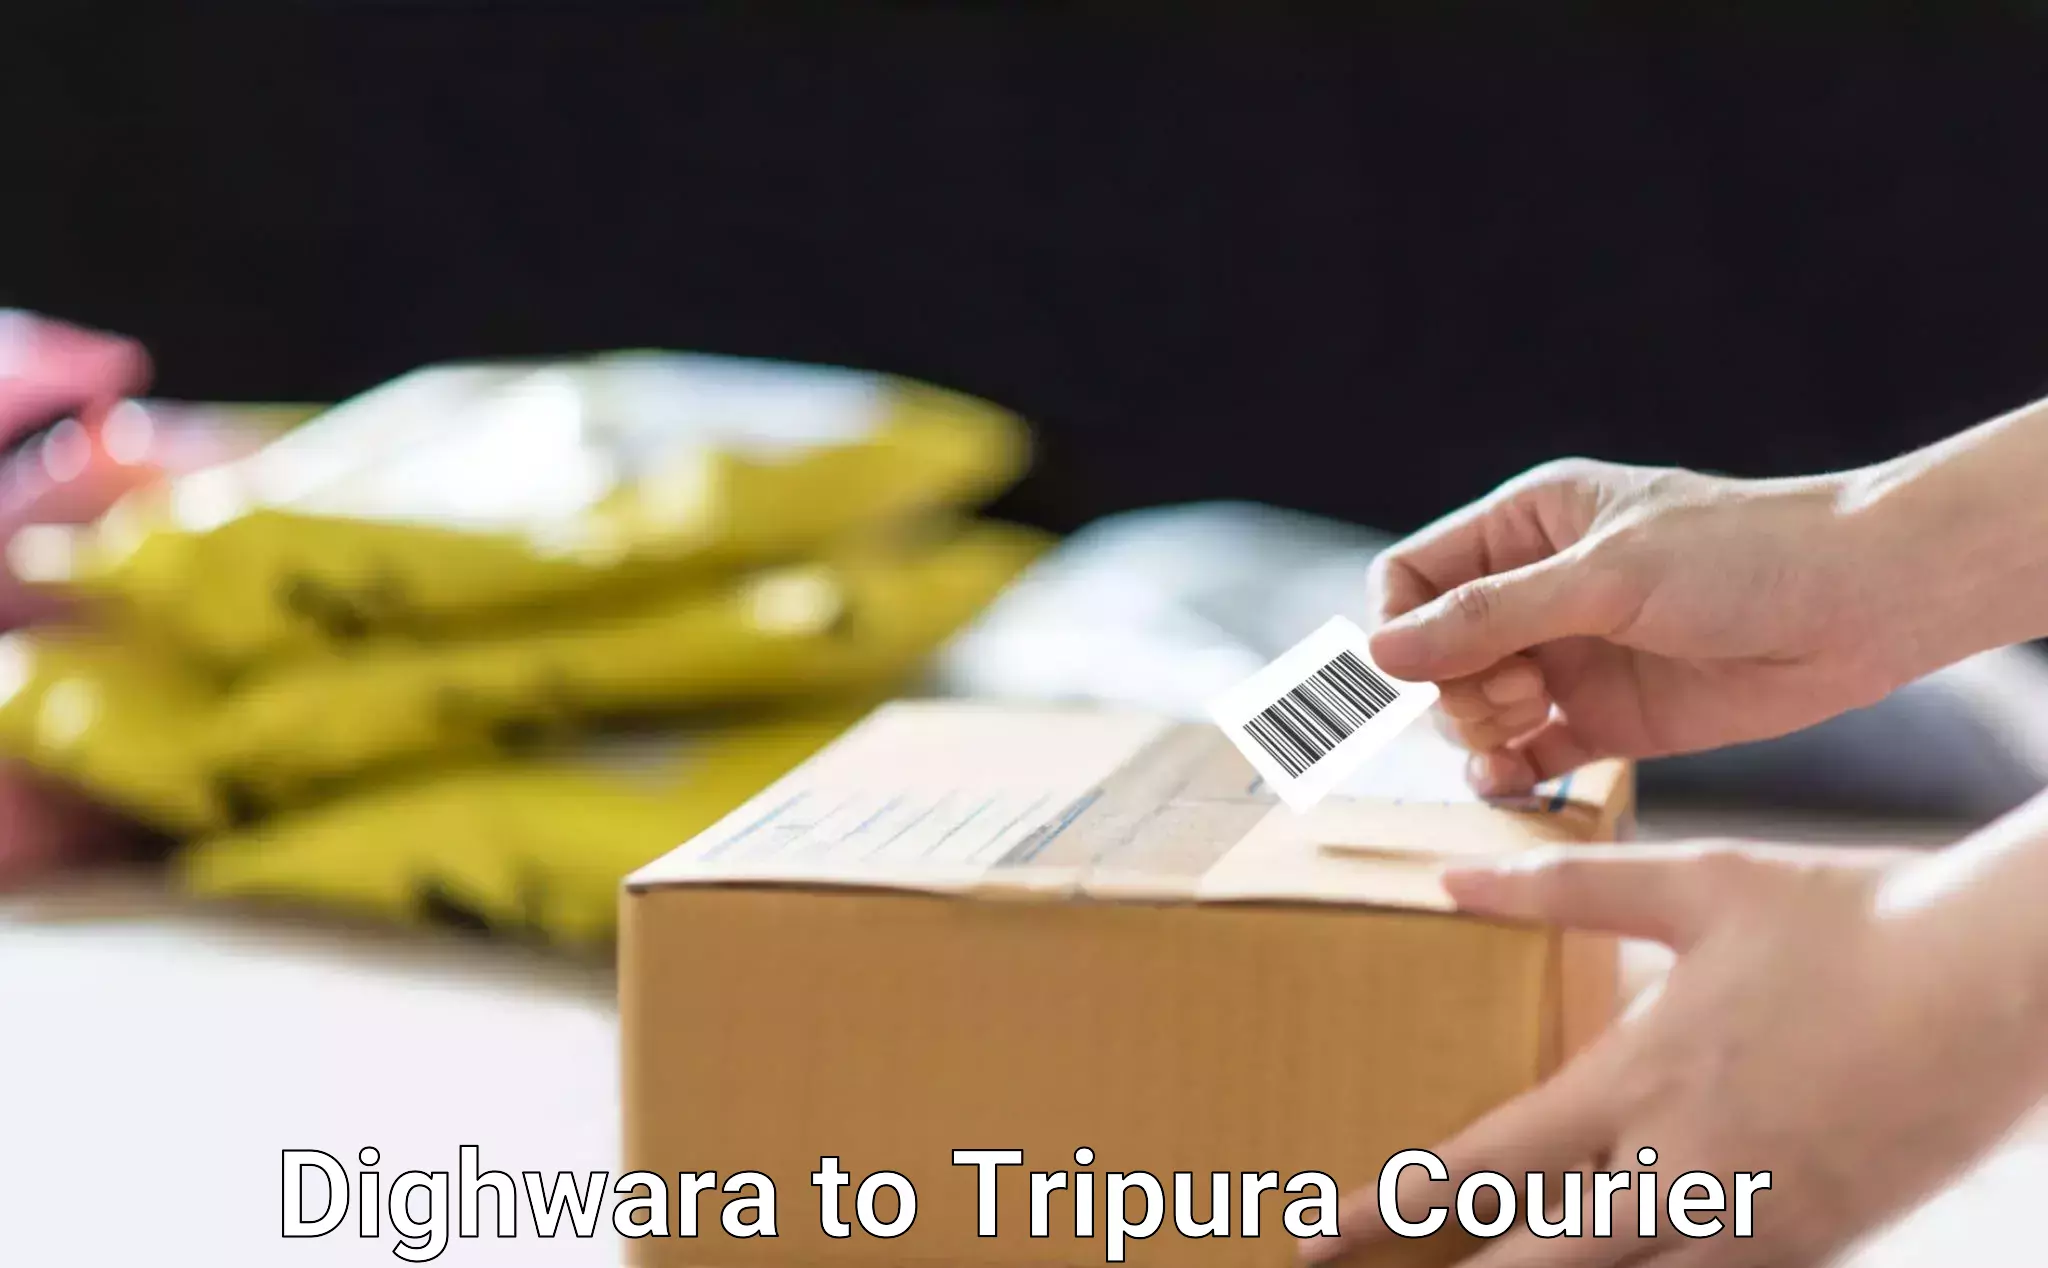 Professional packing and transport in Dighwara to North Tripura